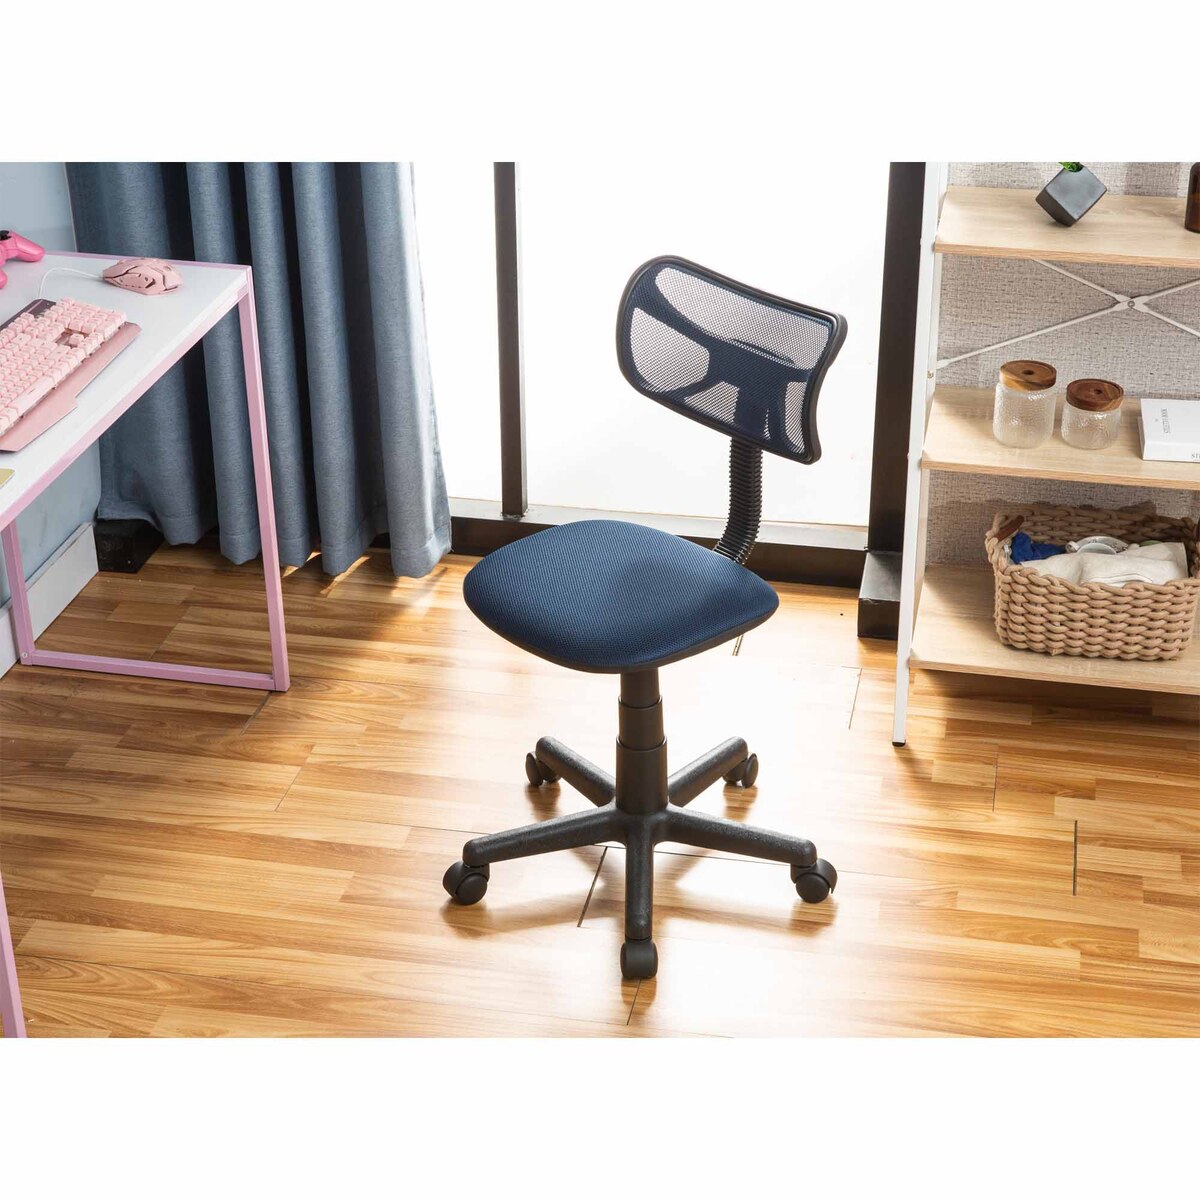 Maple Leaf Adjustable Kids Chair, Office, Computer Chair for Students With Swivel Wheels Navy WK657591